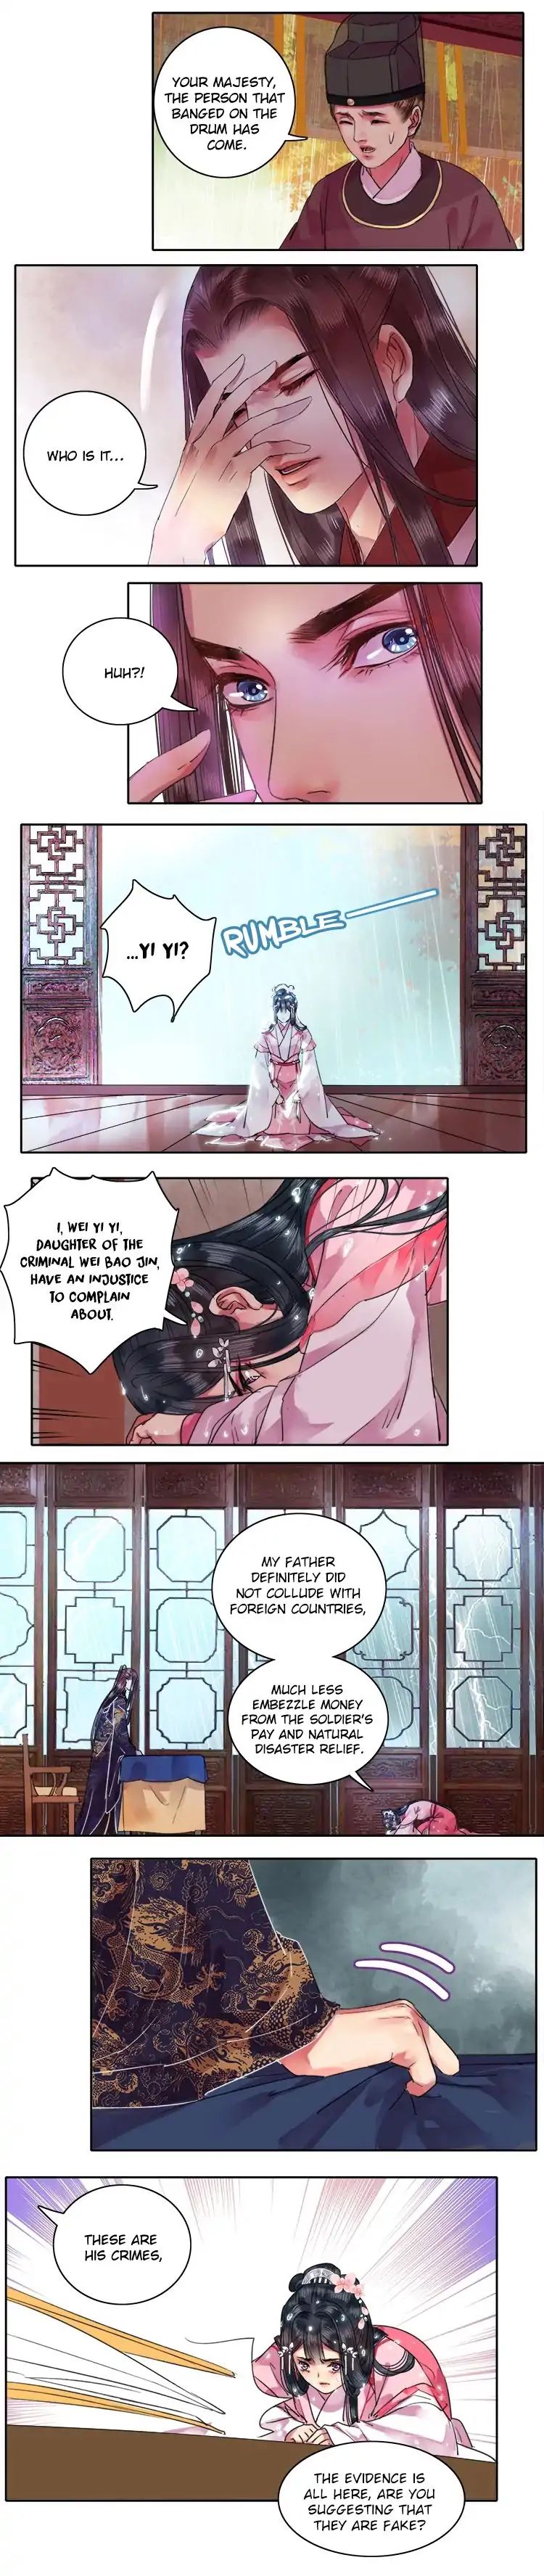 Princess In The Prince's Harem - Page 2